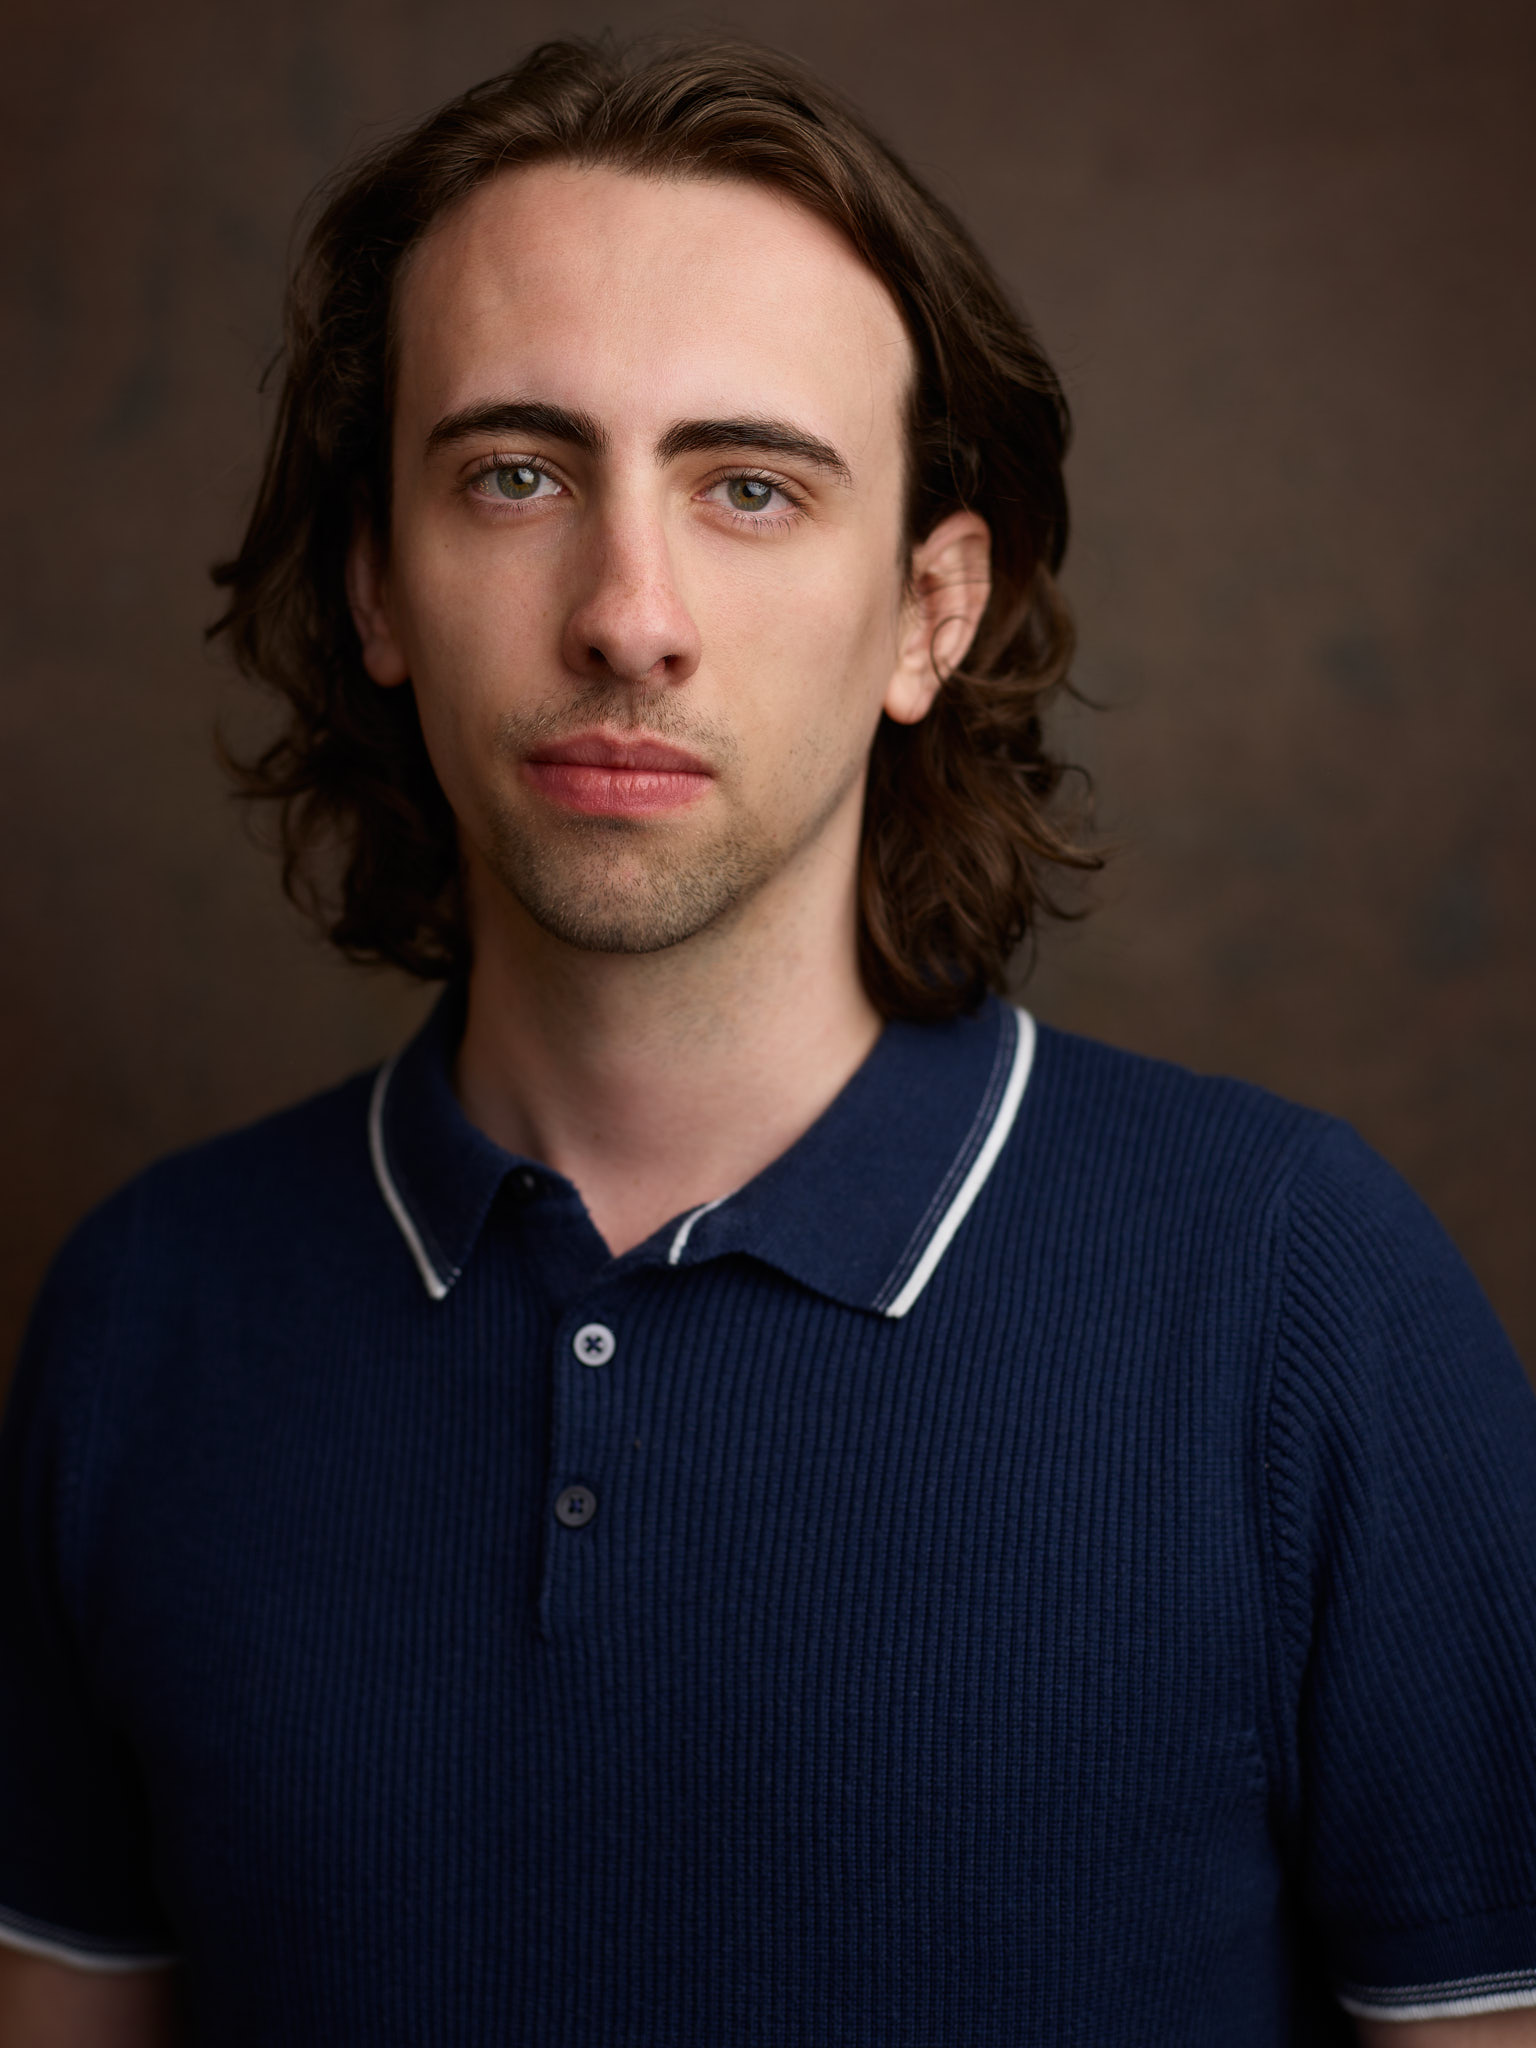 Actors headshot - a man with shoulder length brown hair wears a blue collared tshirt